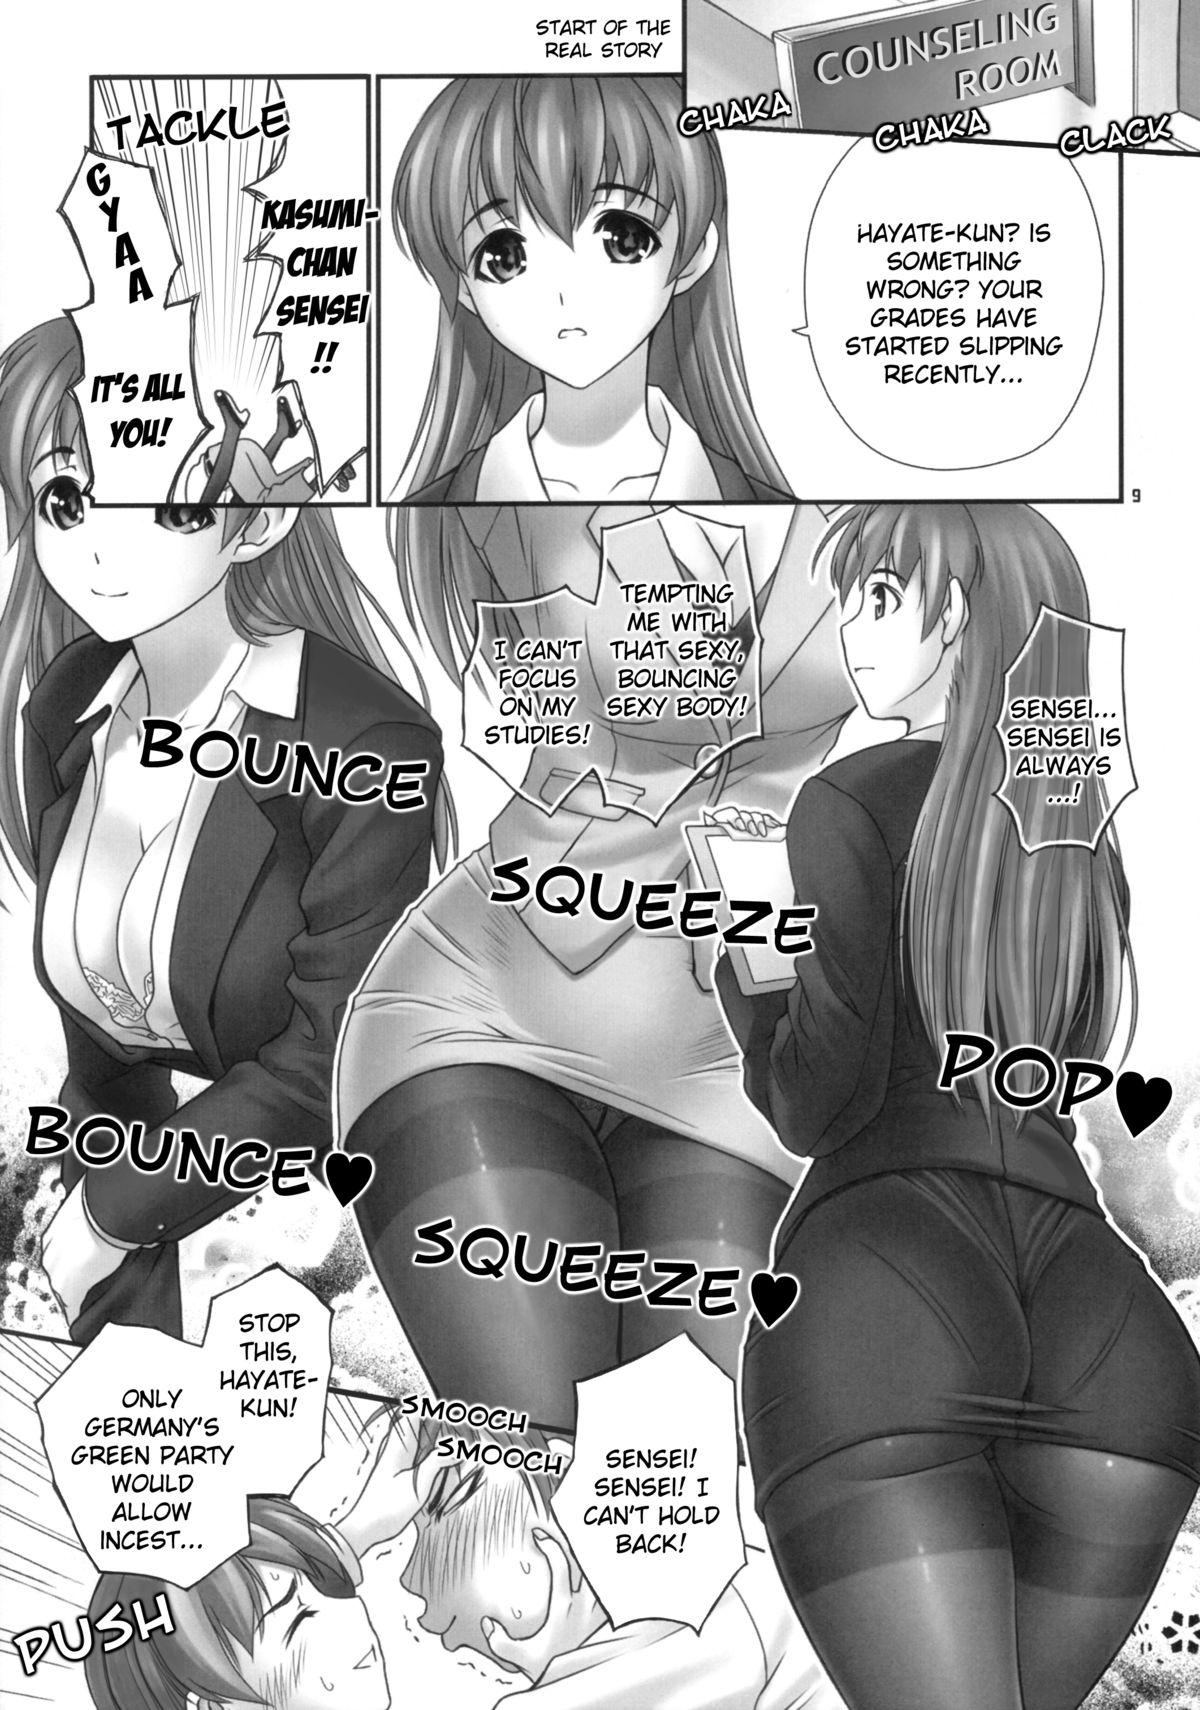 Maledom St. Dead or Alive Highschool - Love Love Kasumi Chan Teacher - Dead or alive Stepfather - Page 8